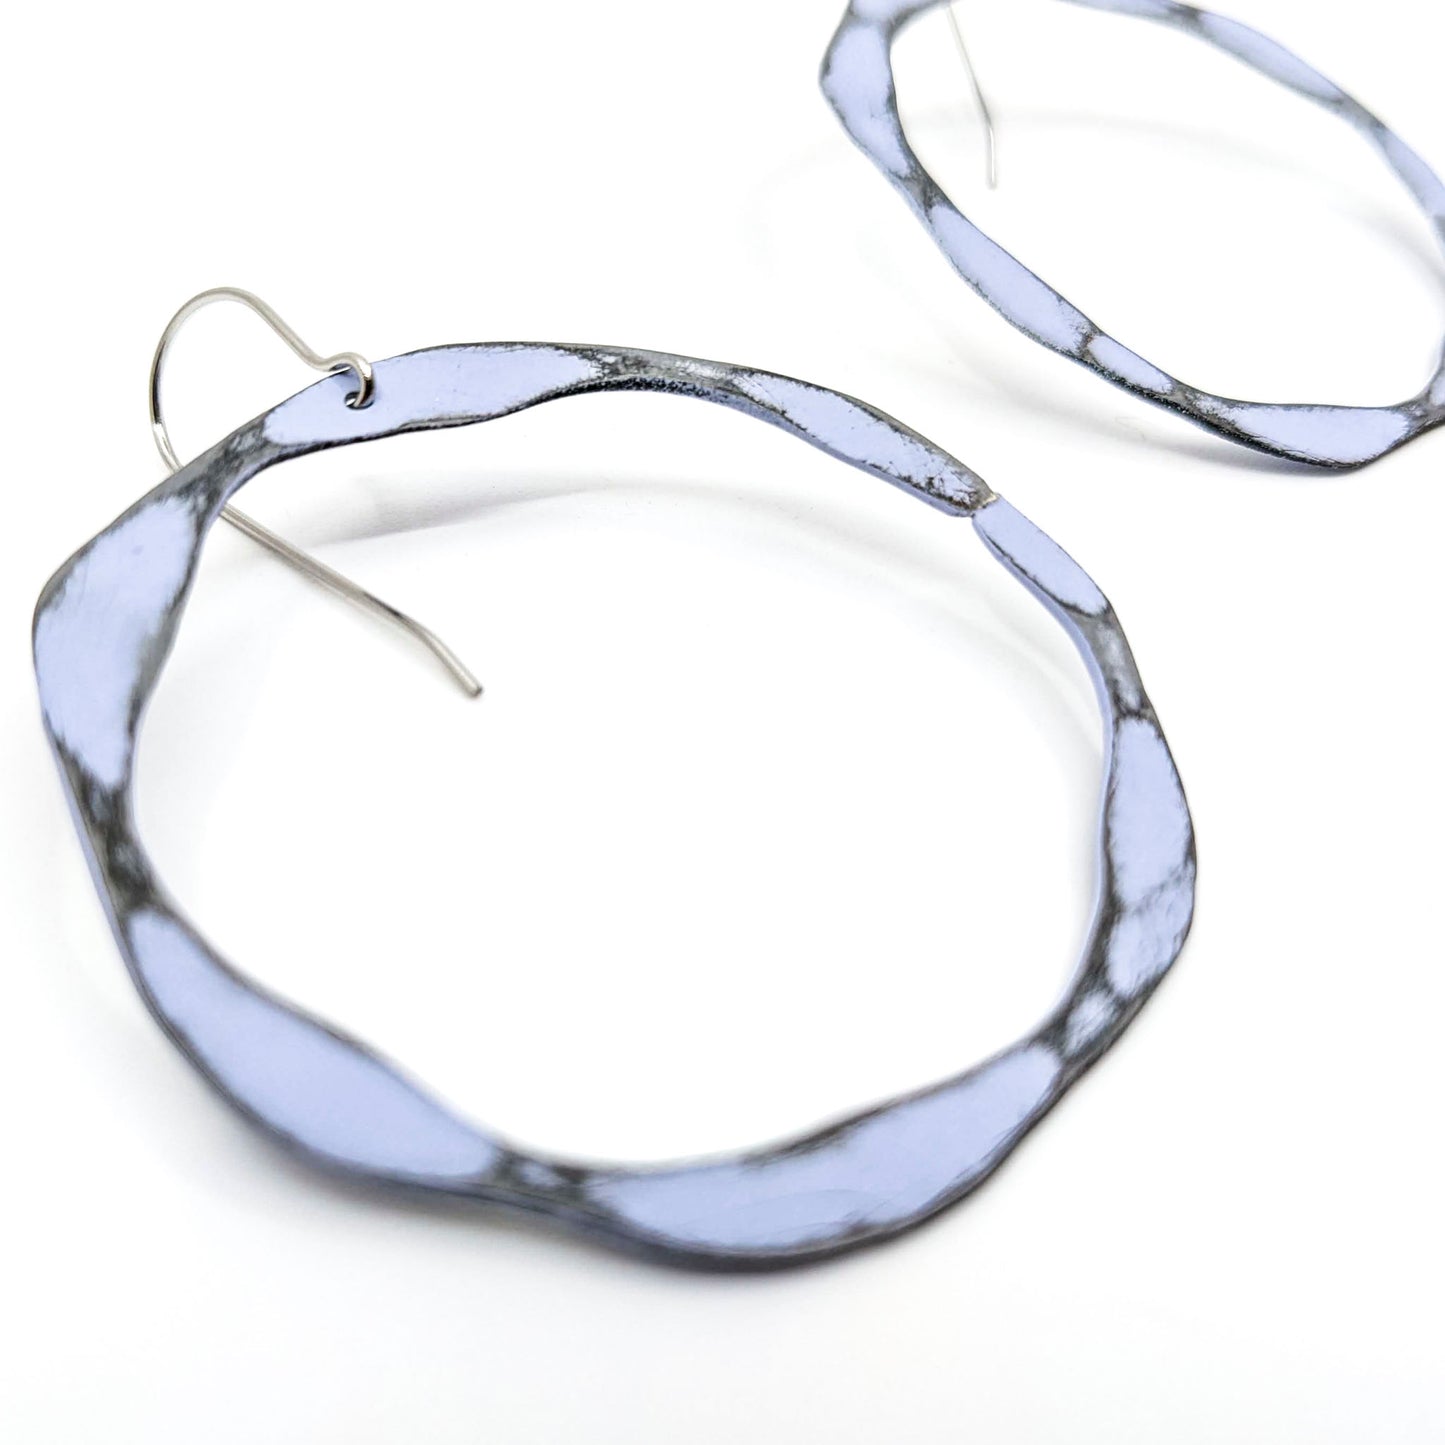 Forged Circle, Lavender Earrings